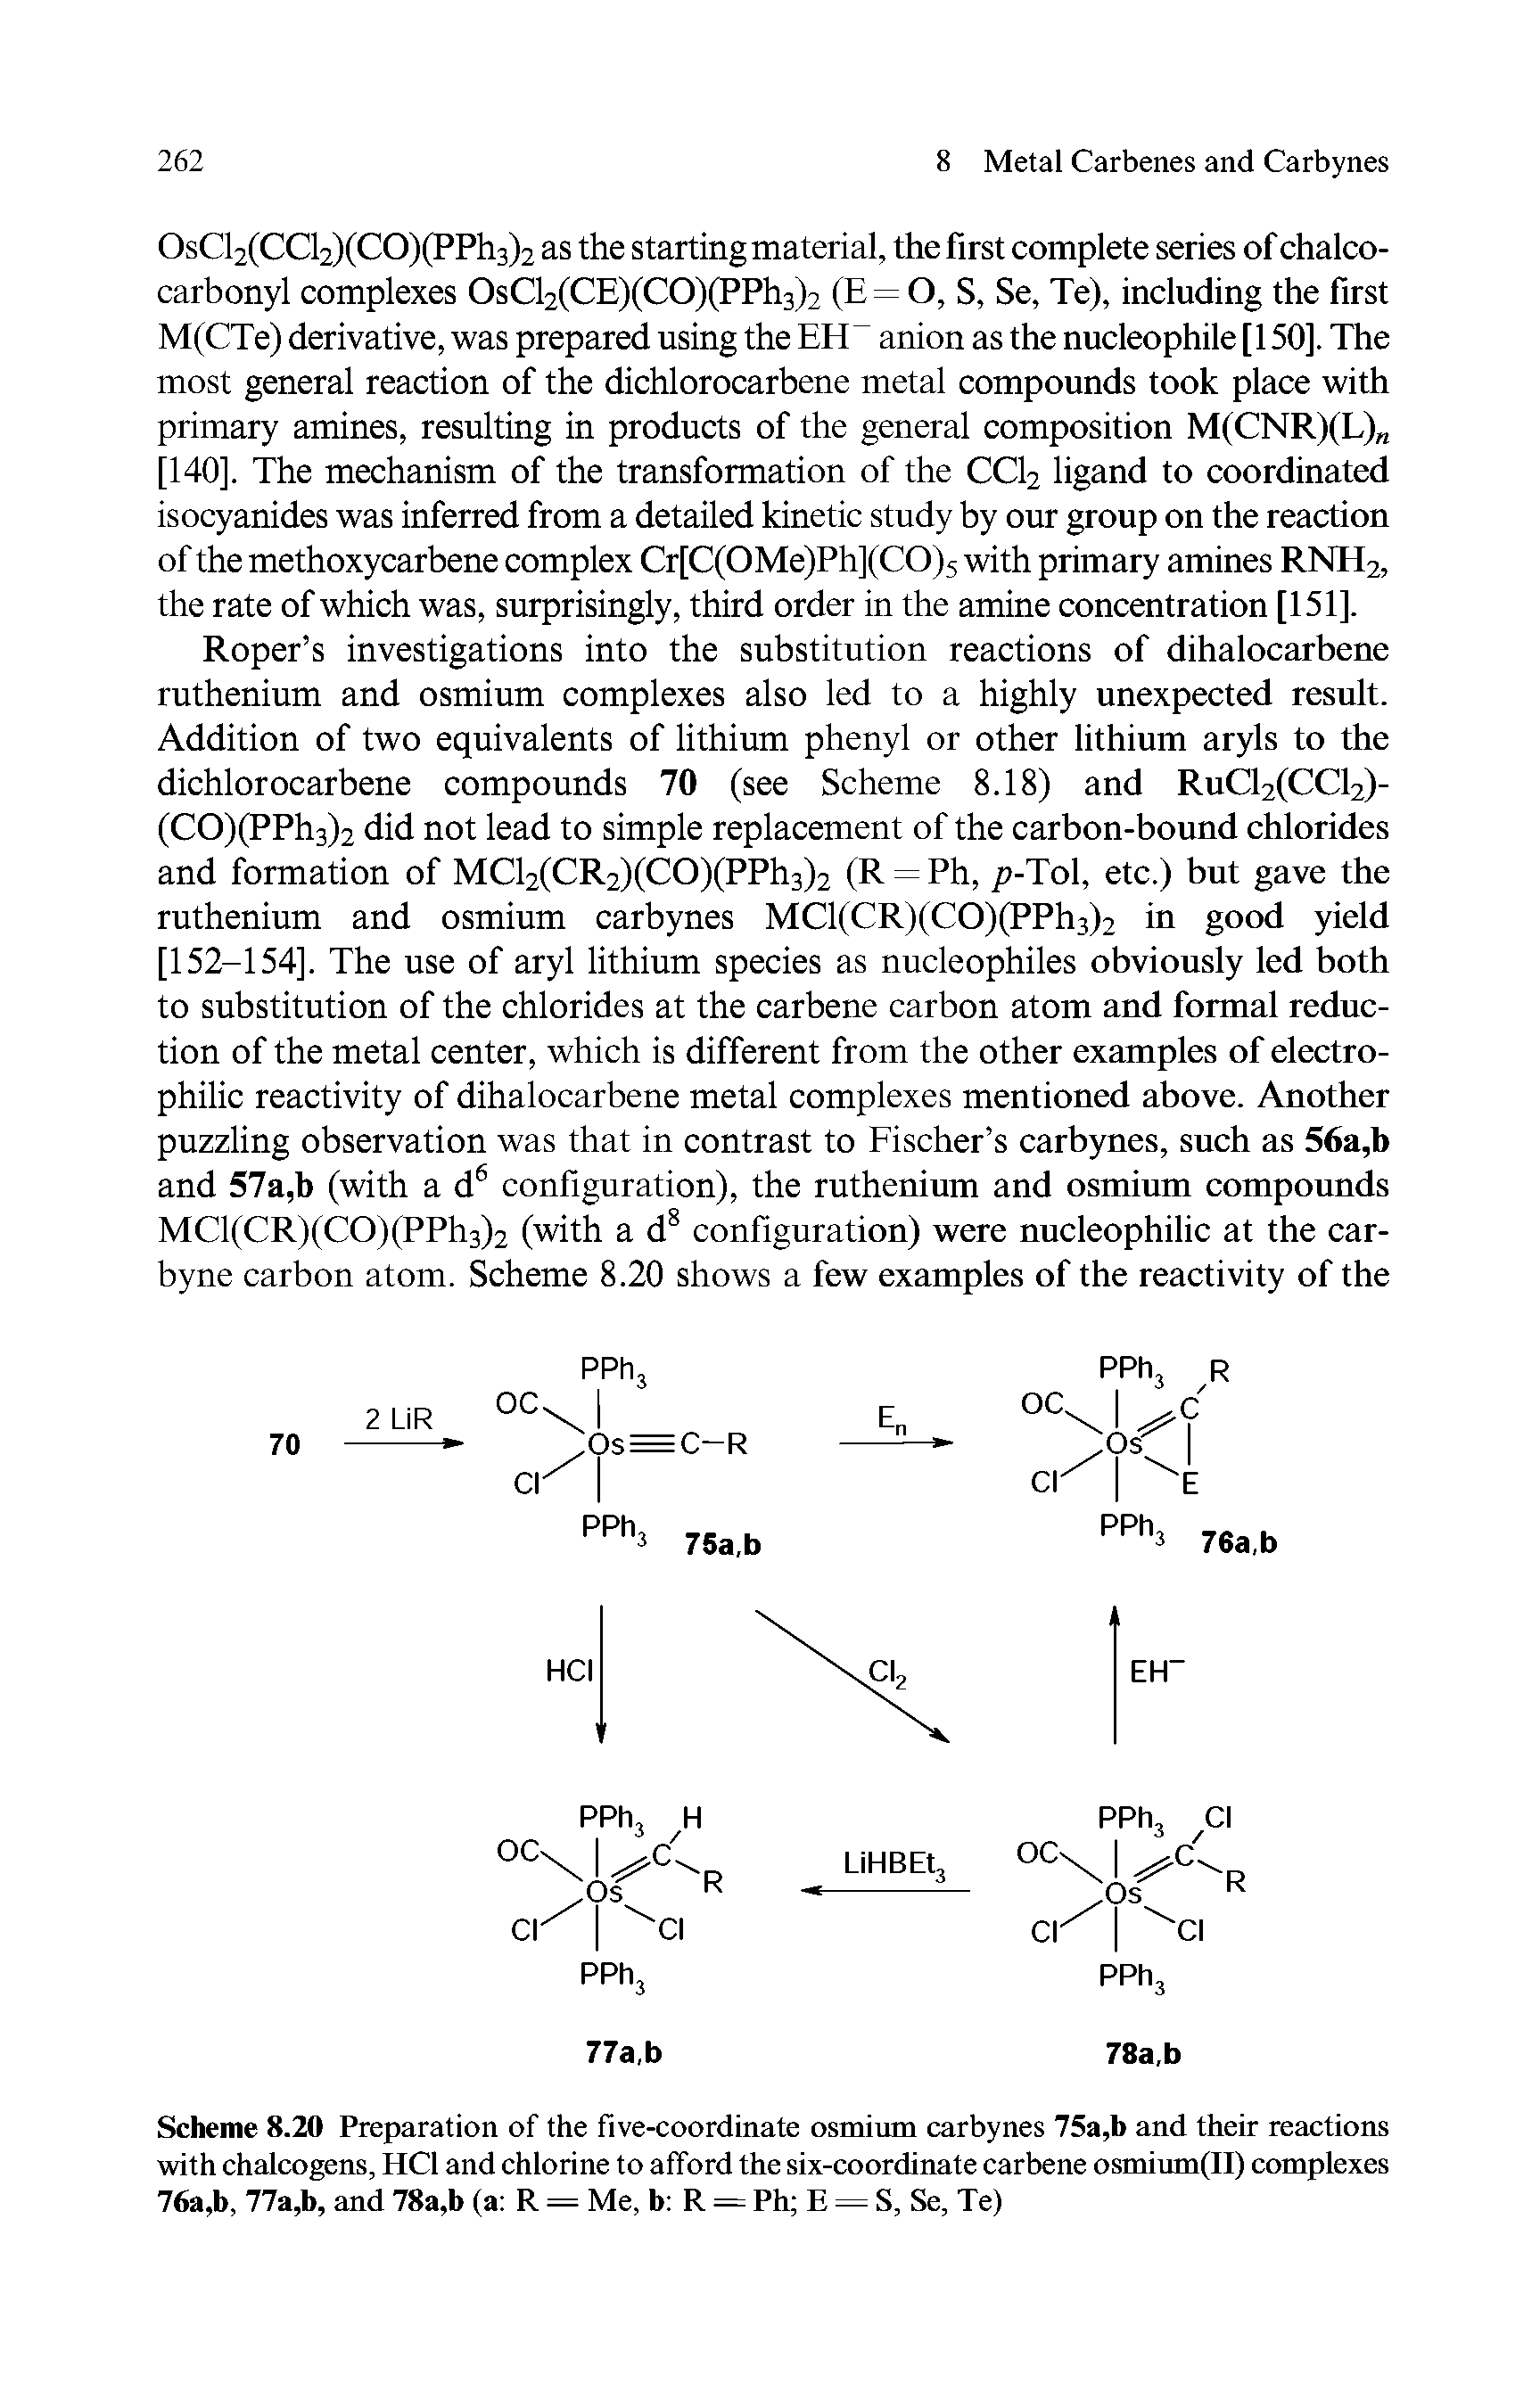 Scheme 8.20 Preparation of the five-coordinate osmium carbynes 75a,b and their reactions with chalcogens, HCI and chlorine to afford the six-coordinate carbene osmium(II) complexes 76a,b, 77a,b, and 78a,b (a R = Me, b R = Ph E = S, Se, Te)...